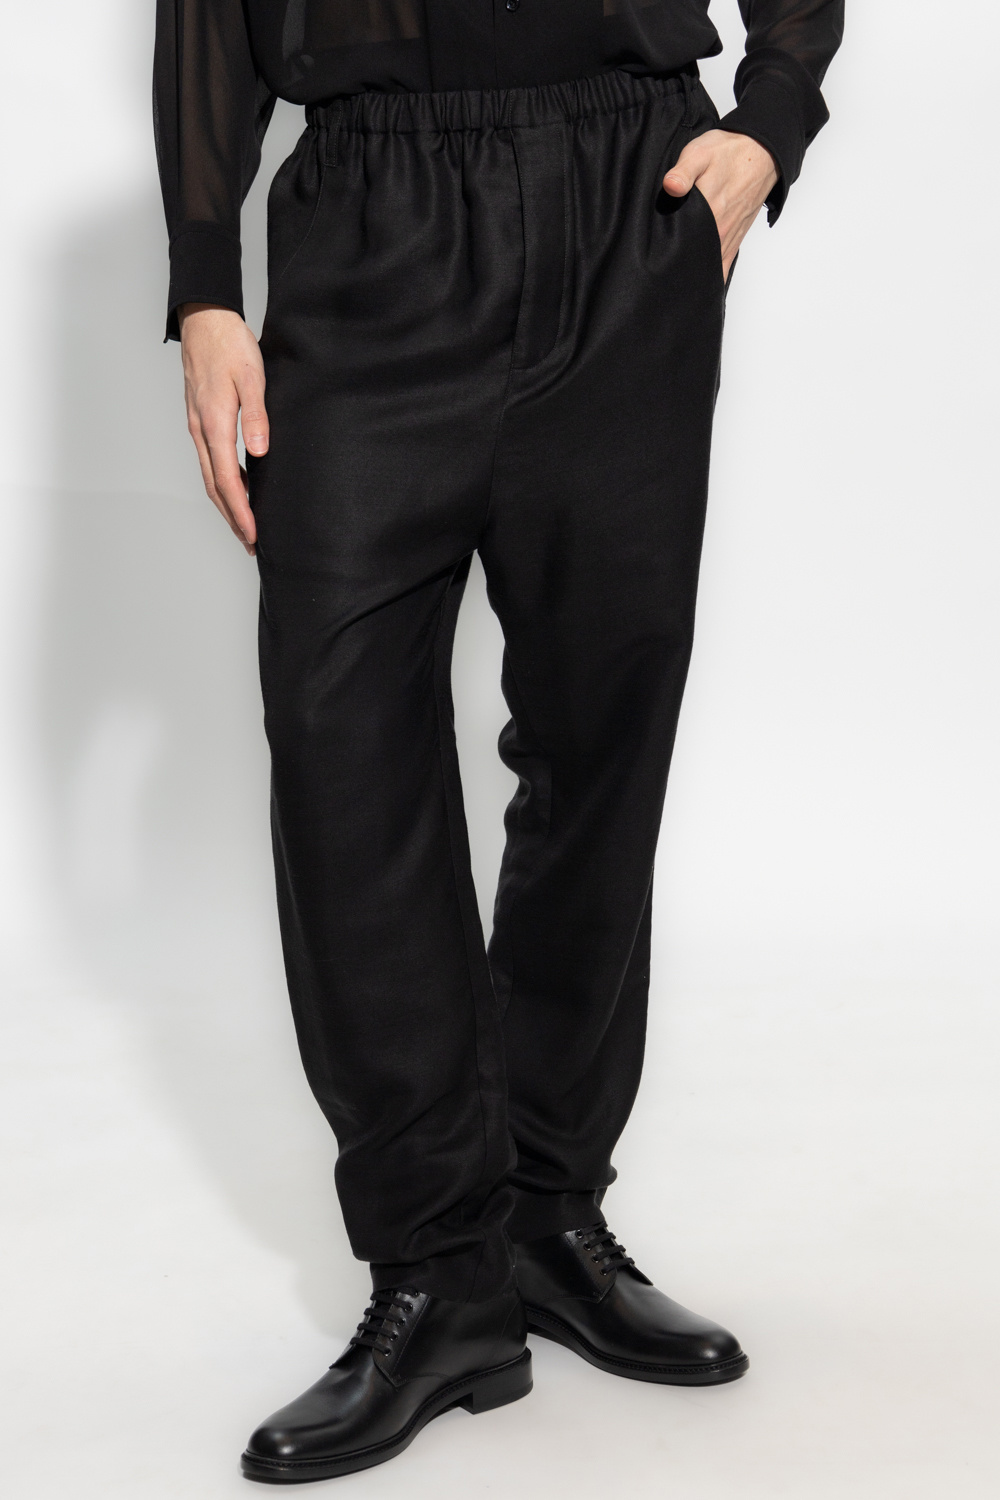 Saint Laurent jacket trousers with tapered legs